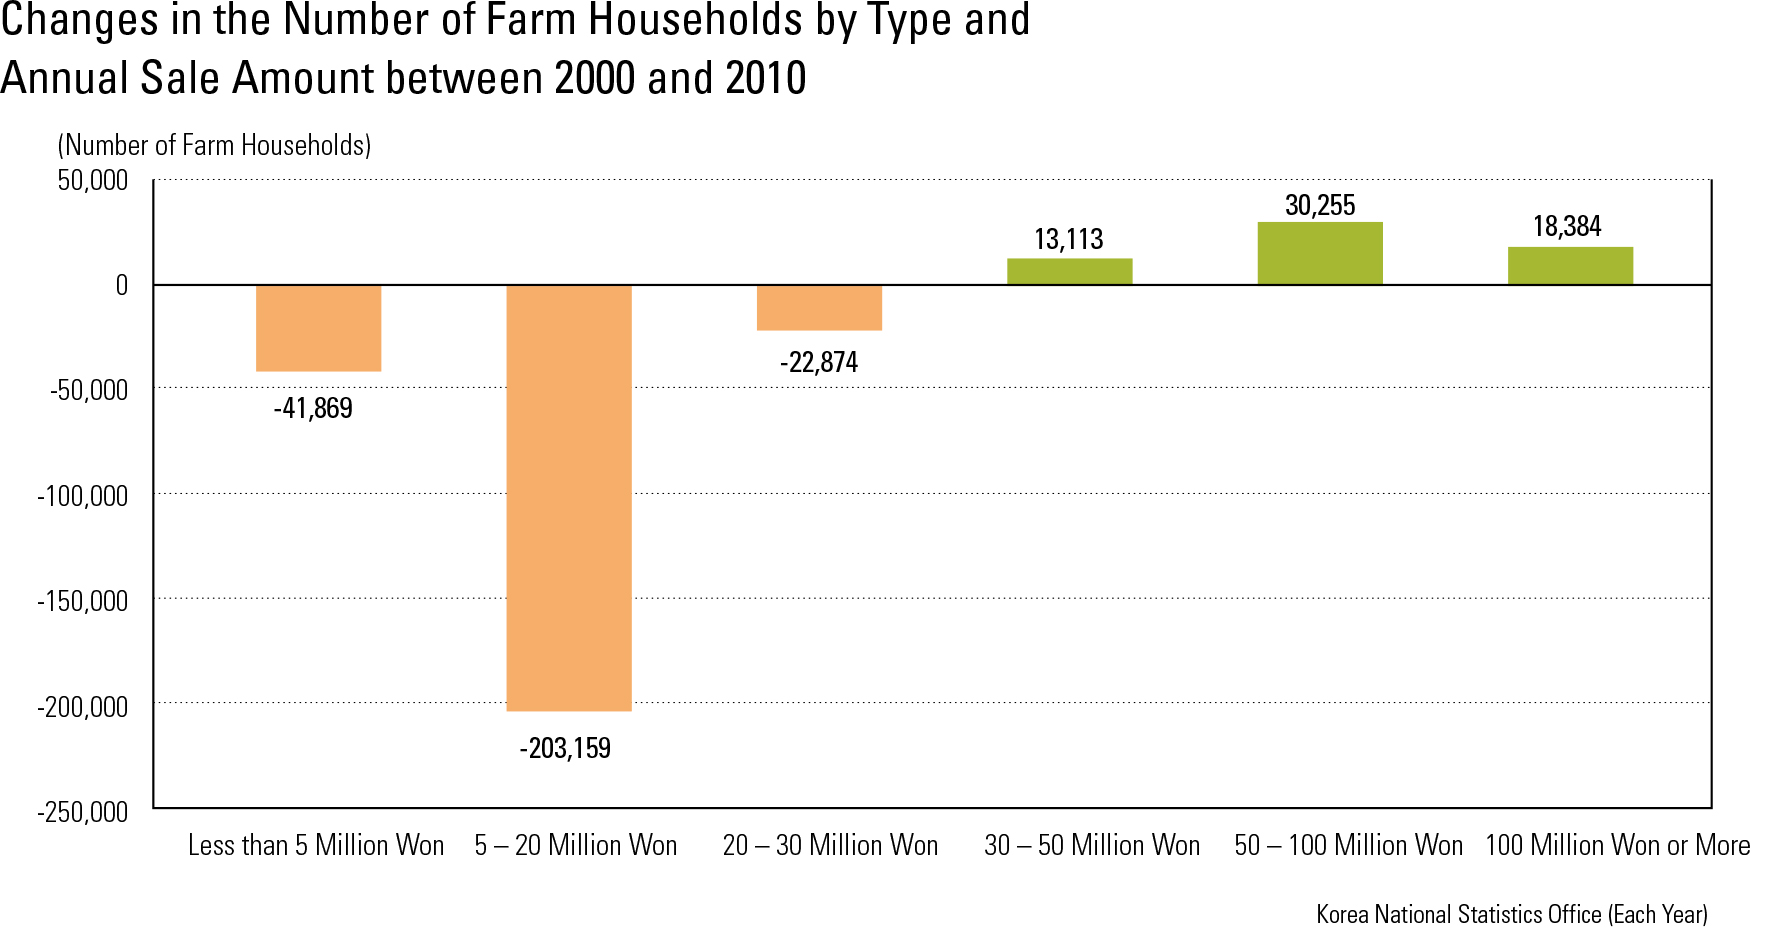 Changes in the Number of Farm Households by Type and Annual Sale Amount between 2000 and 2010